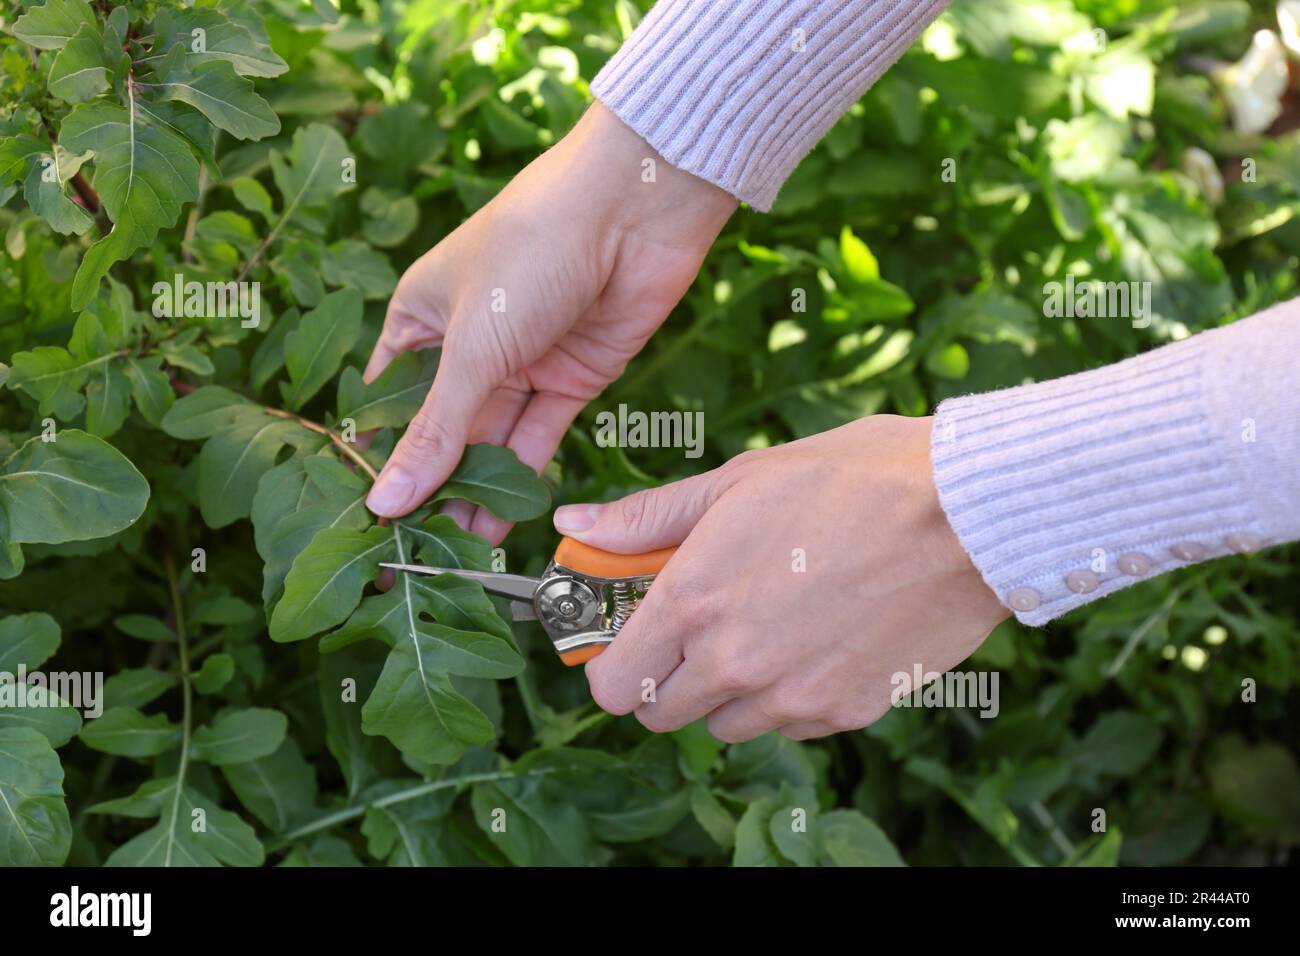 Woman cutting fresh arugula leaves with pruner outdoors, closeup Stock Photo